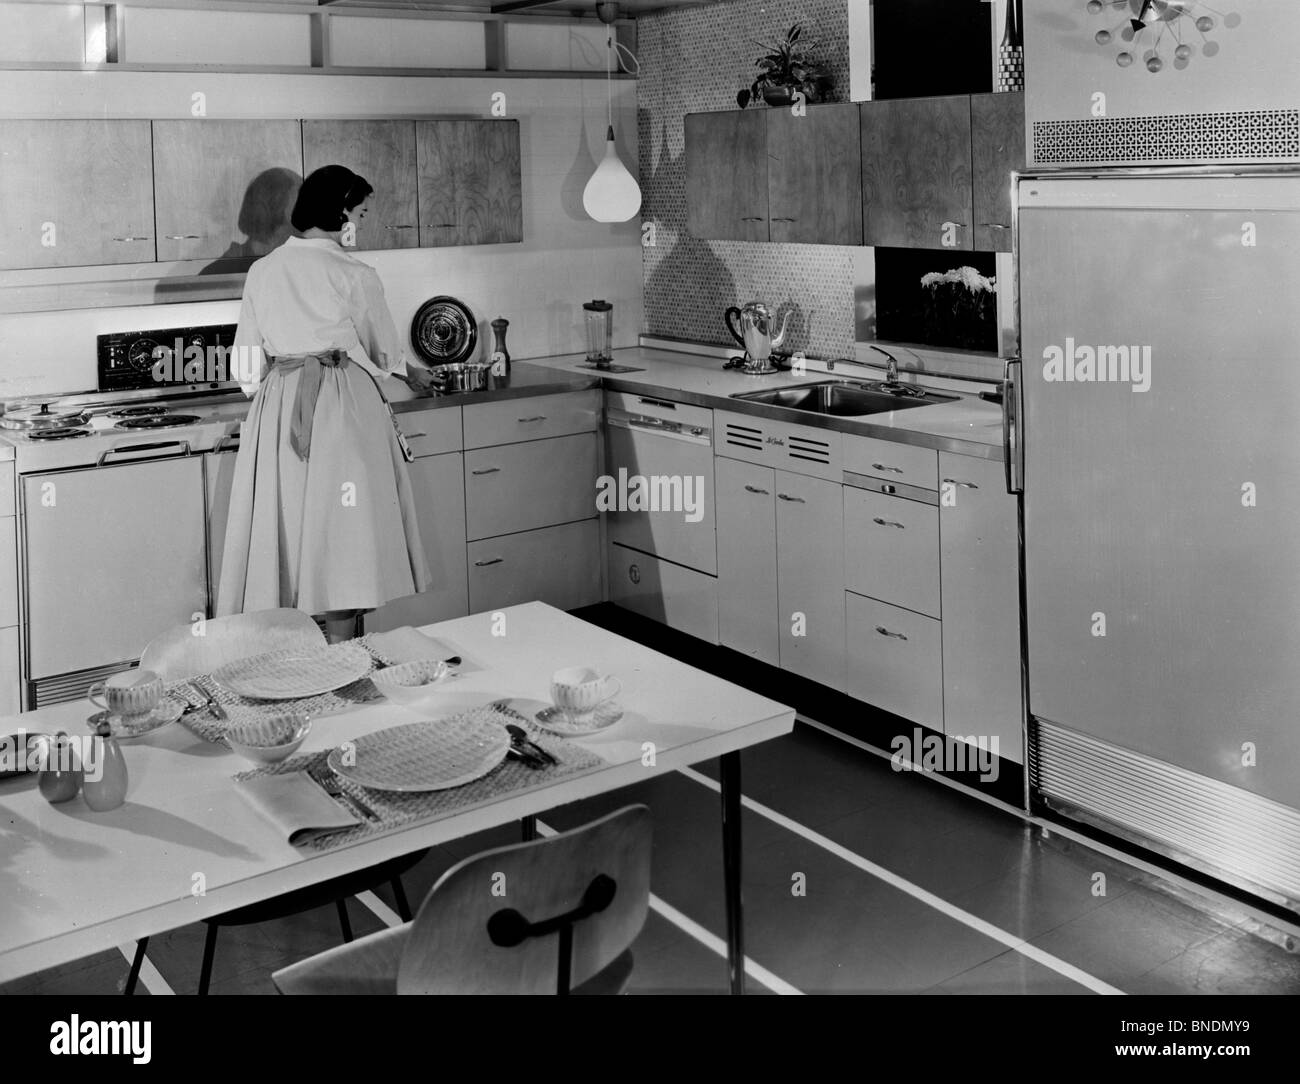 Rear view of a young woman preparing food in a kitchen Stock Photo